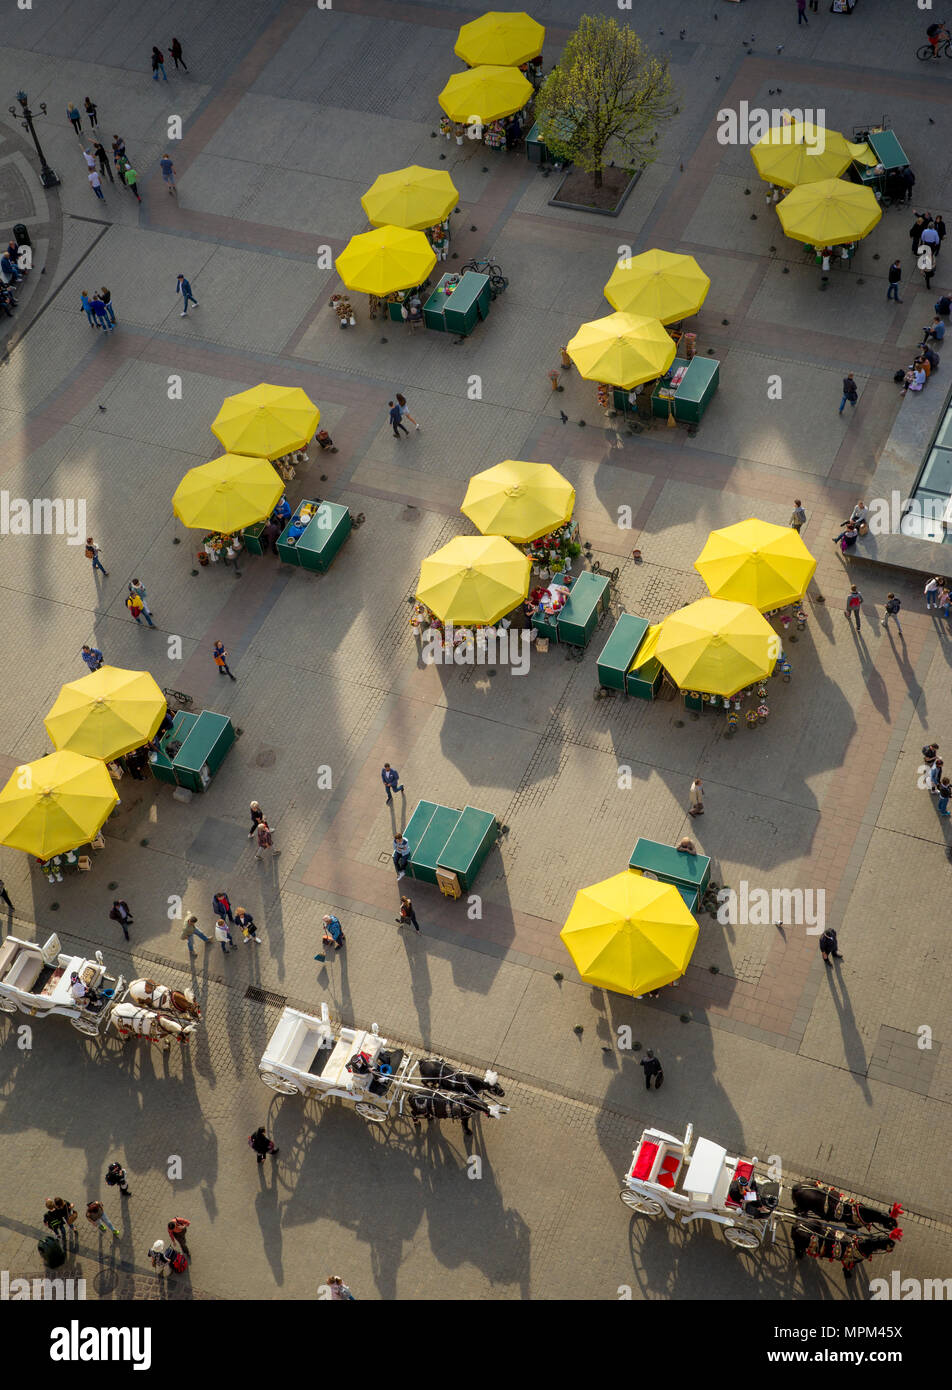 Aerial view of main market square in Krakow, Poland Stock Photo